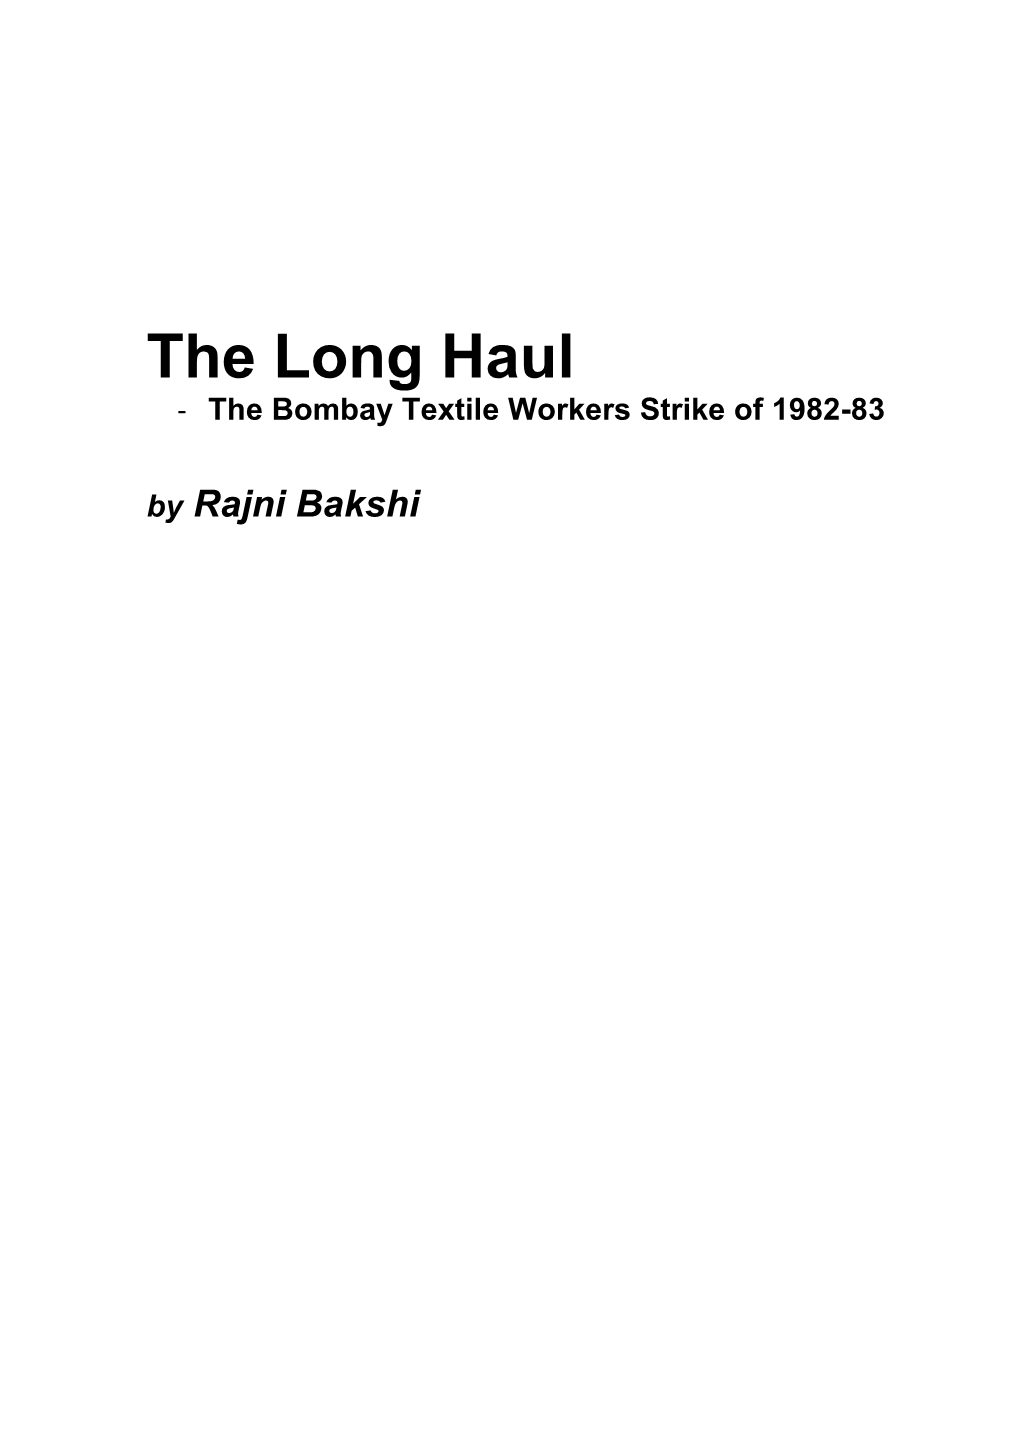 The Long Haul - the Bombay Textile Workers Strike of 1982-83